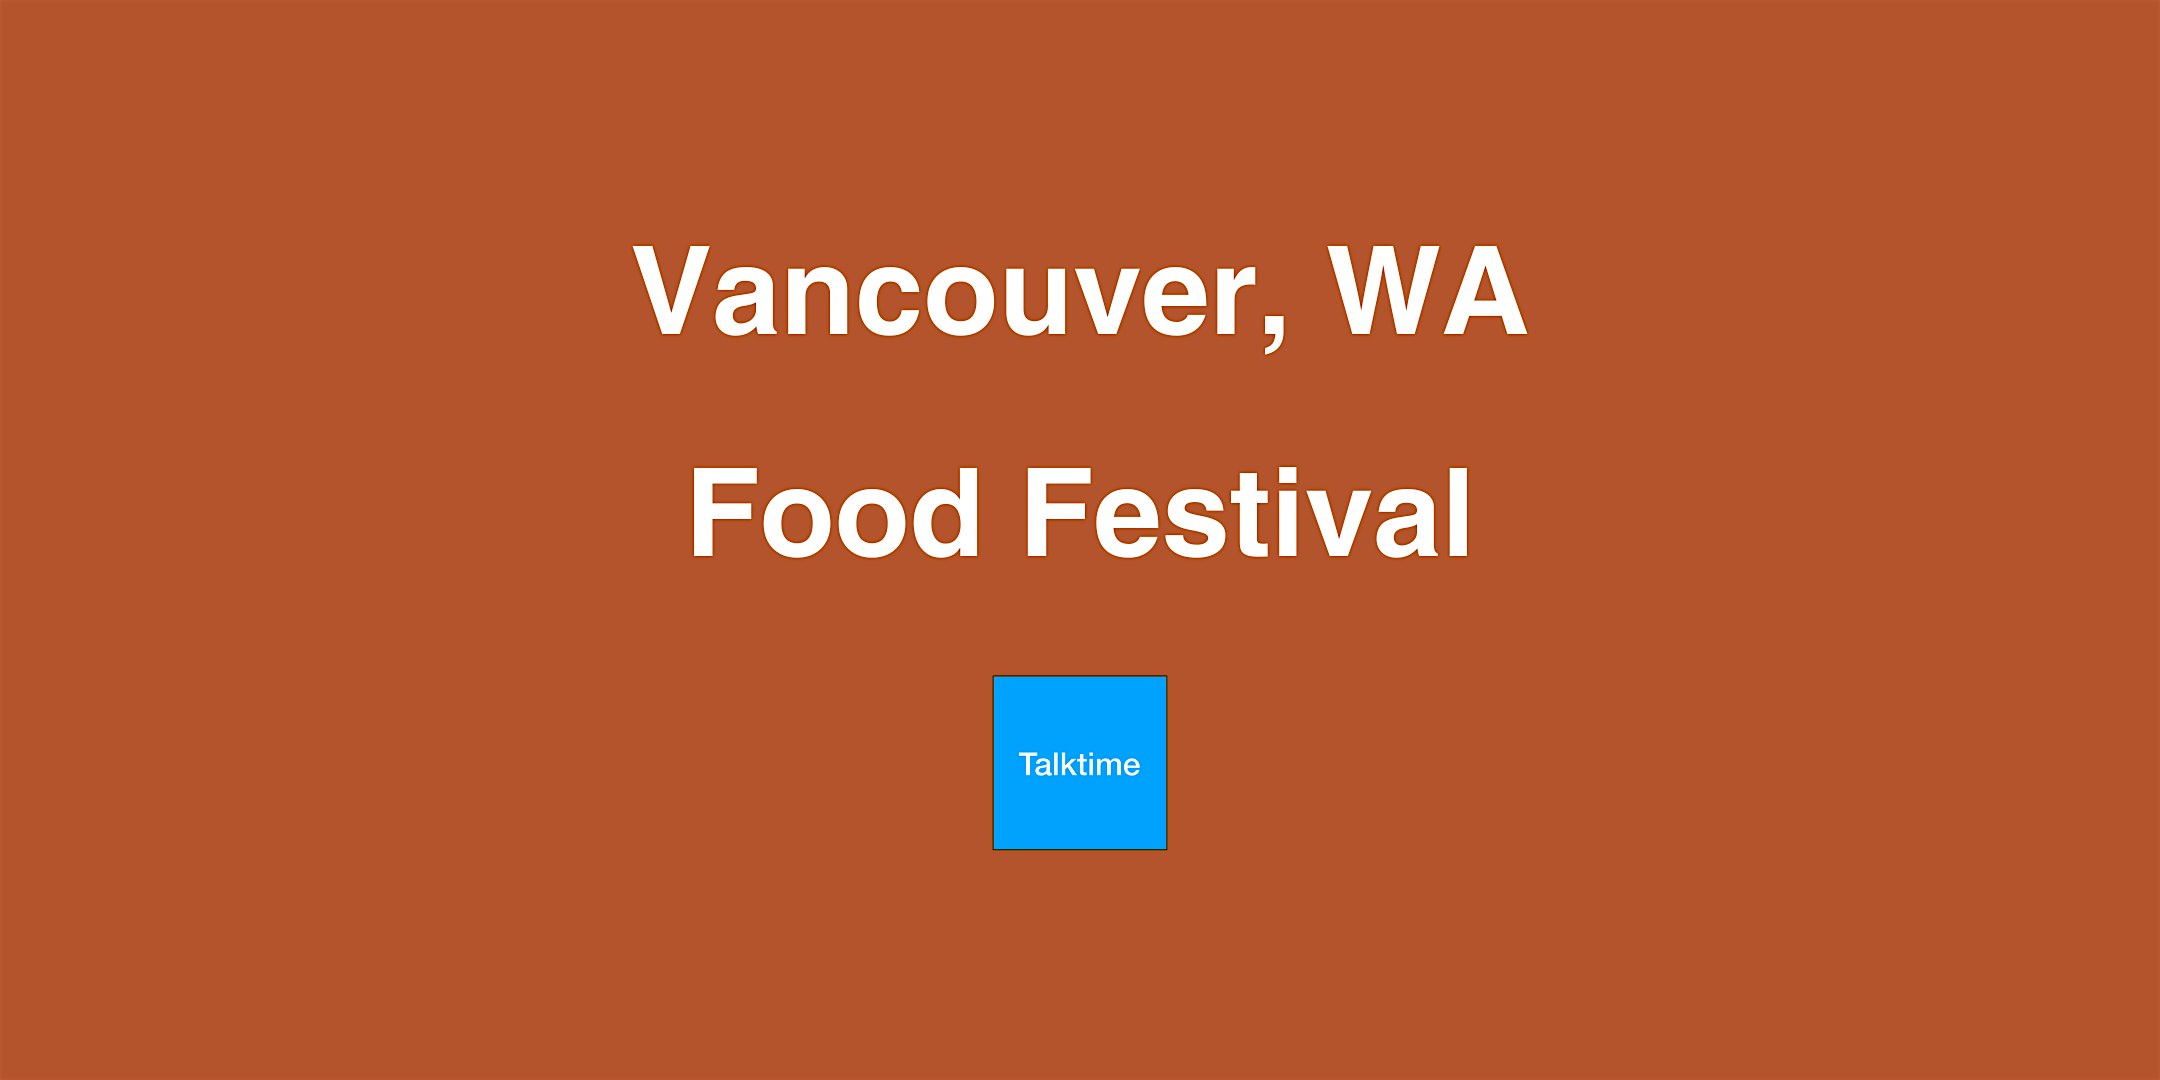 Food Festival - Vancouver